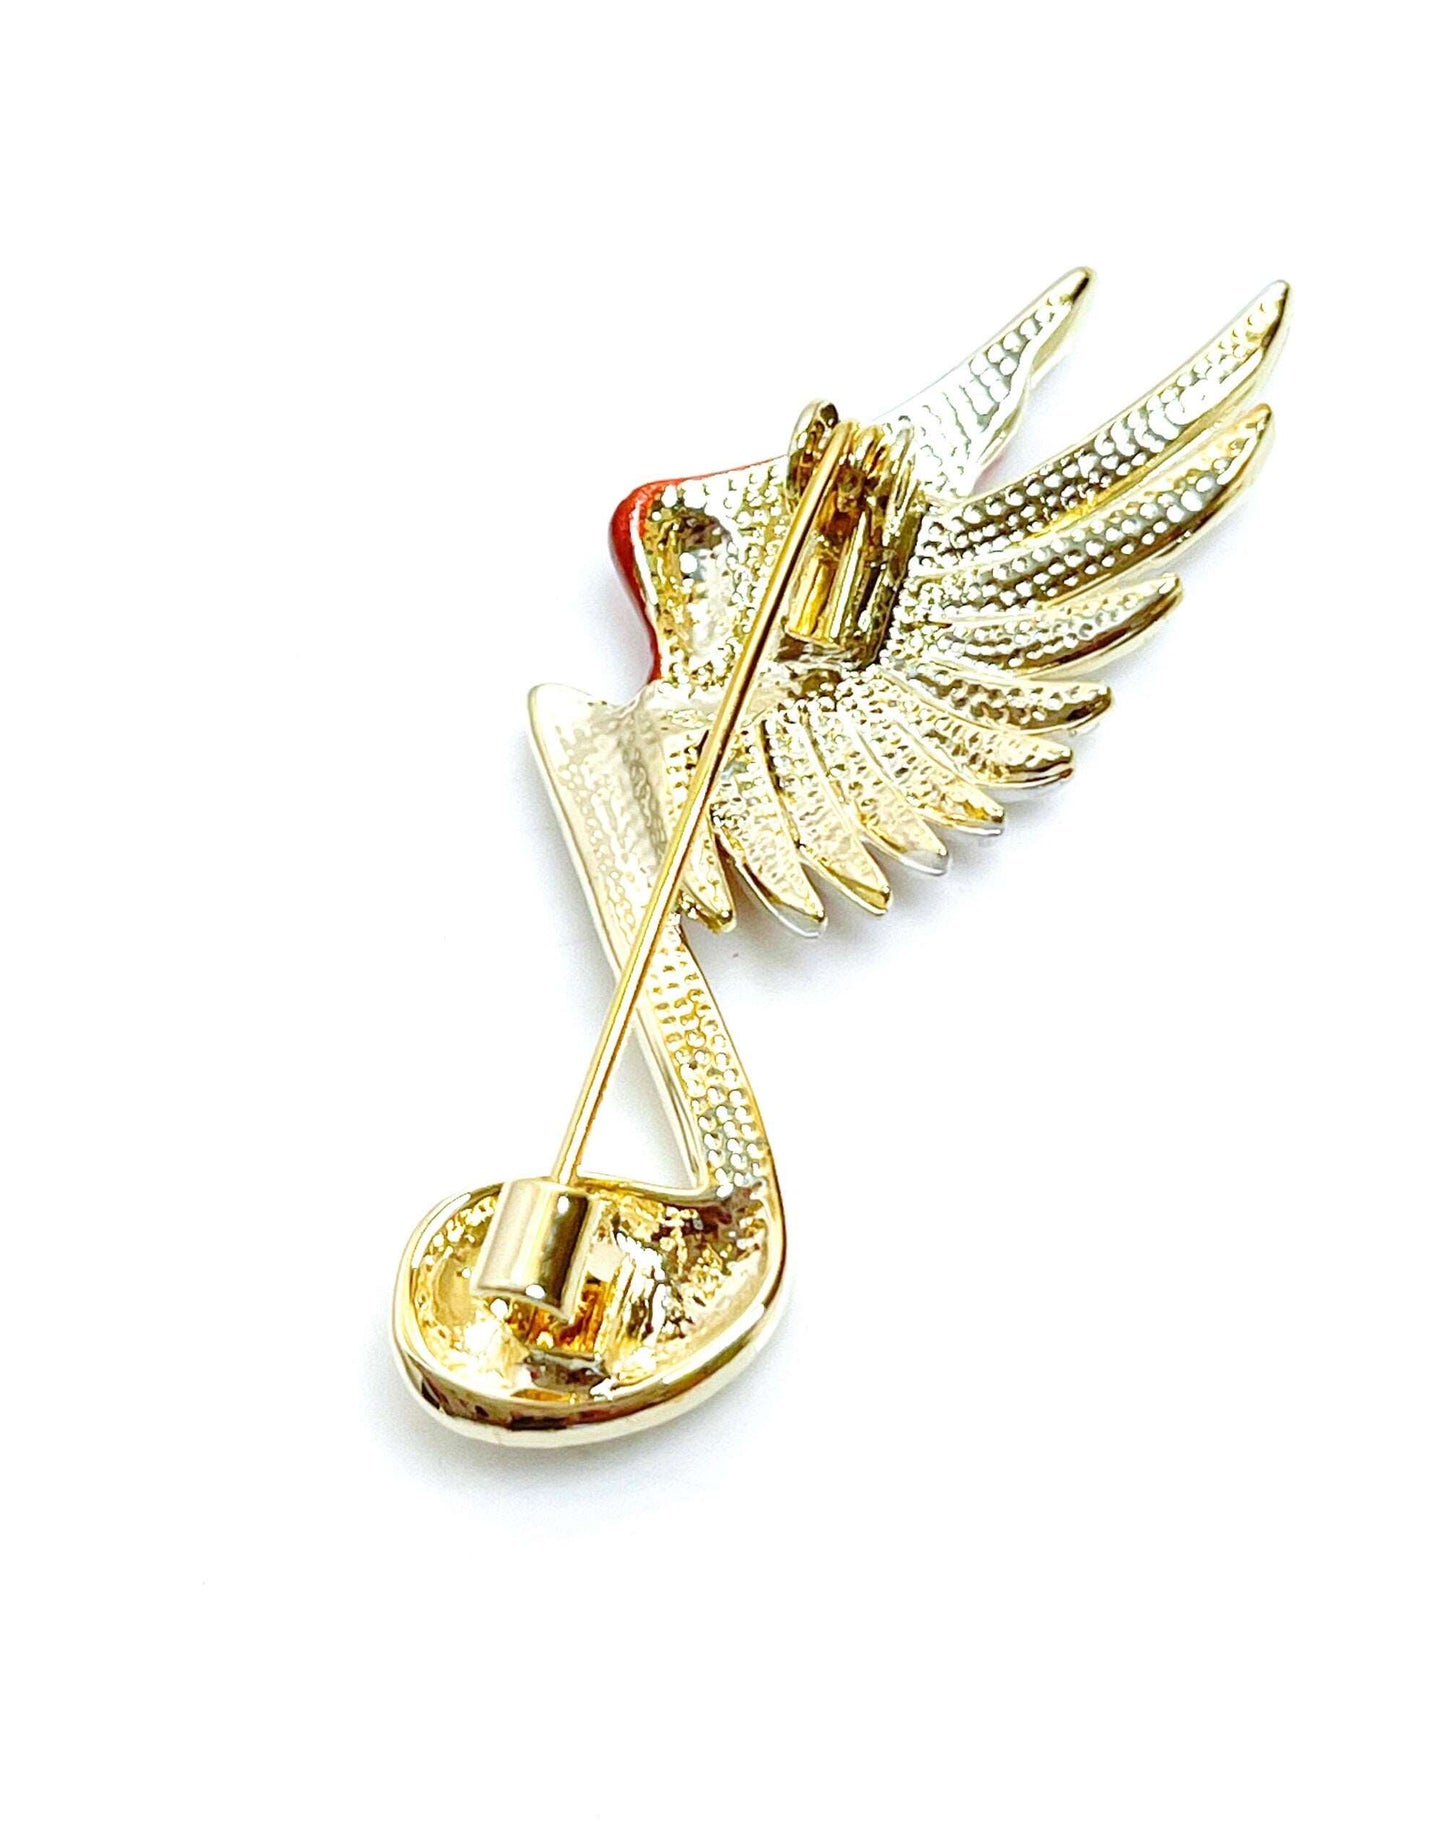 Flying Music Note Brooch | White Wing Gold Crystal Pin | Crystal Treble Clef